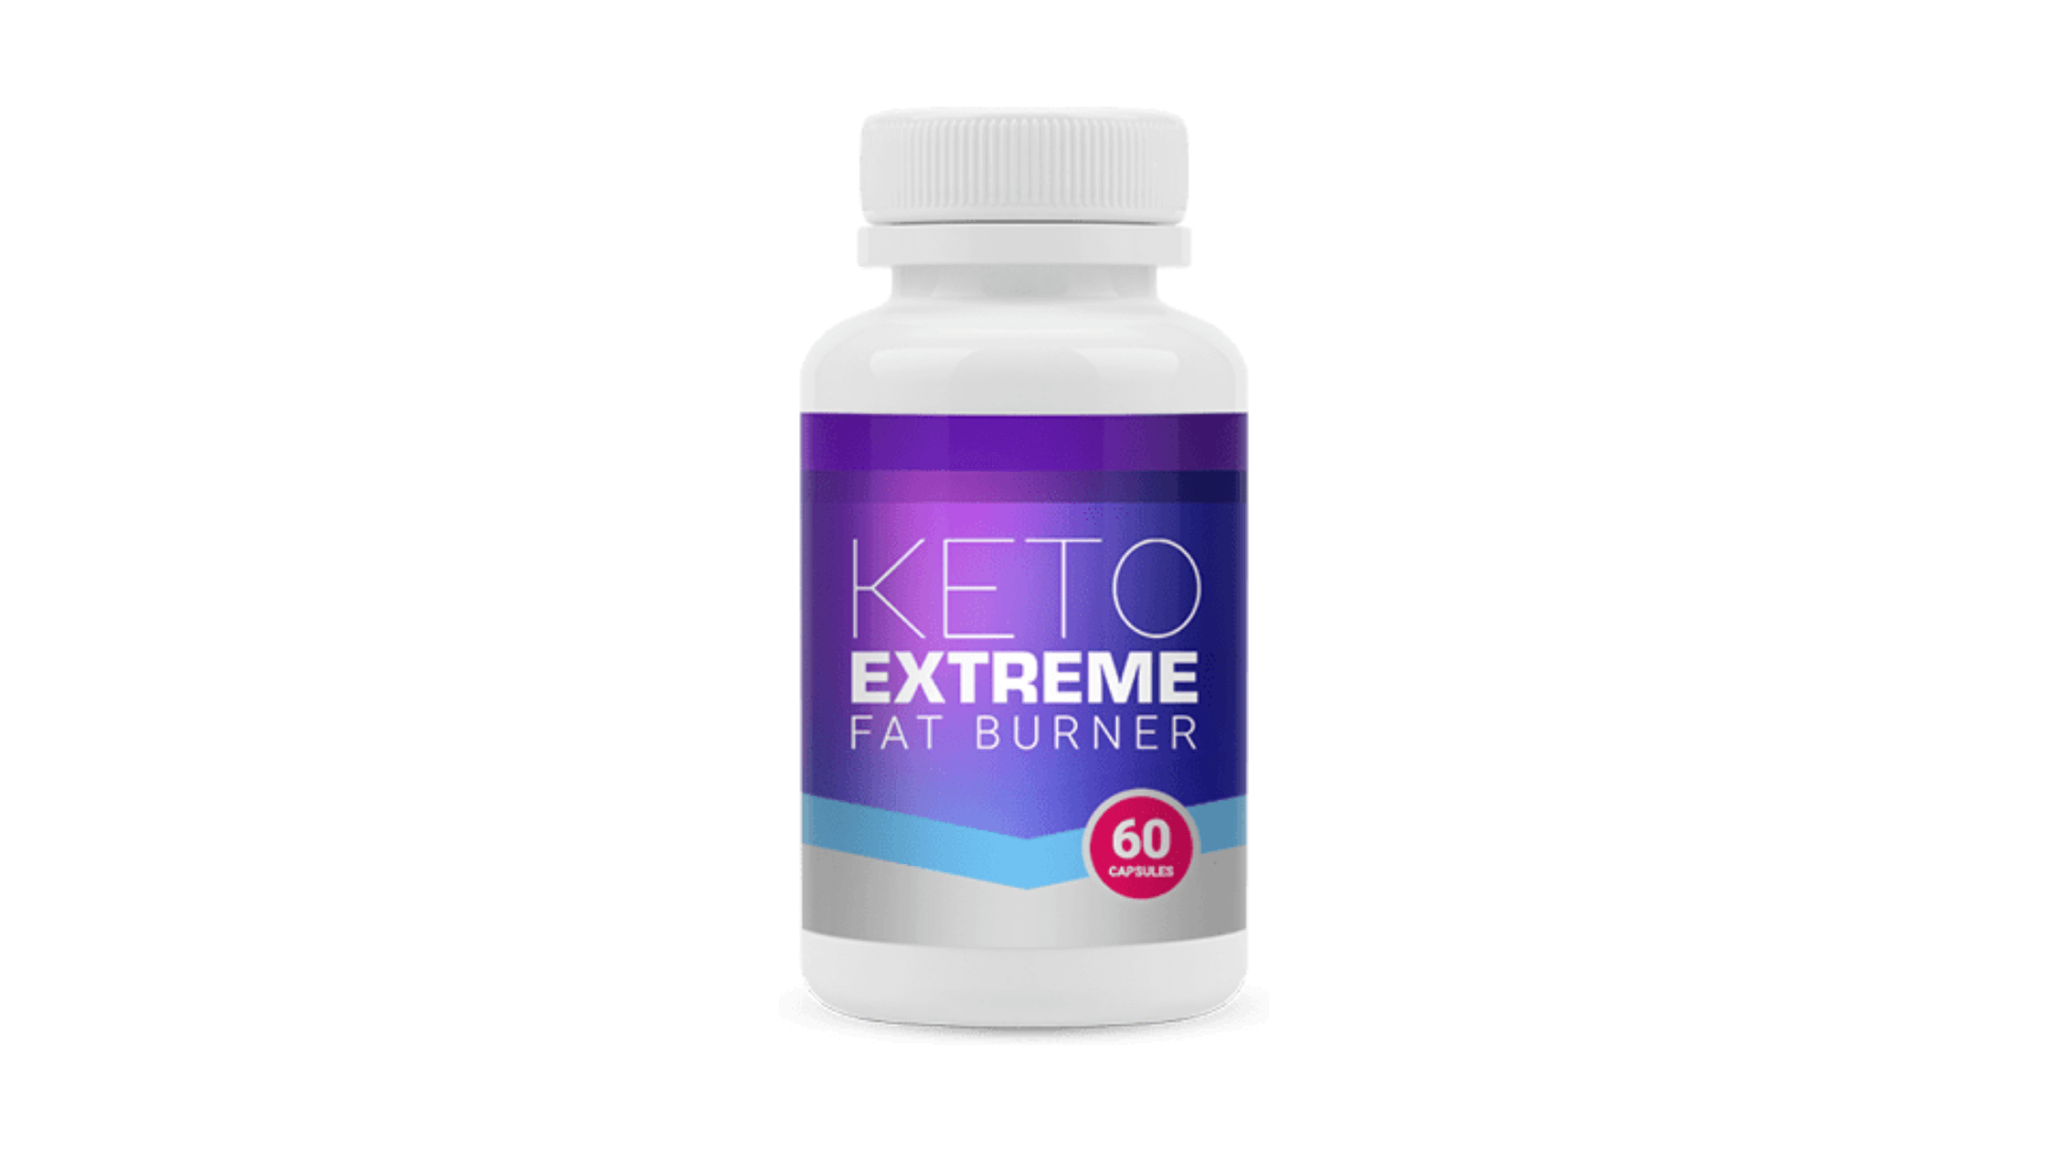 Keto Extreme Fat Burner South Africa Reviews